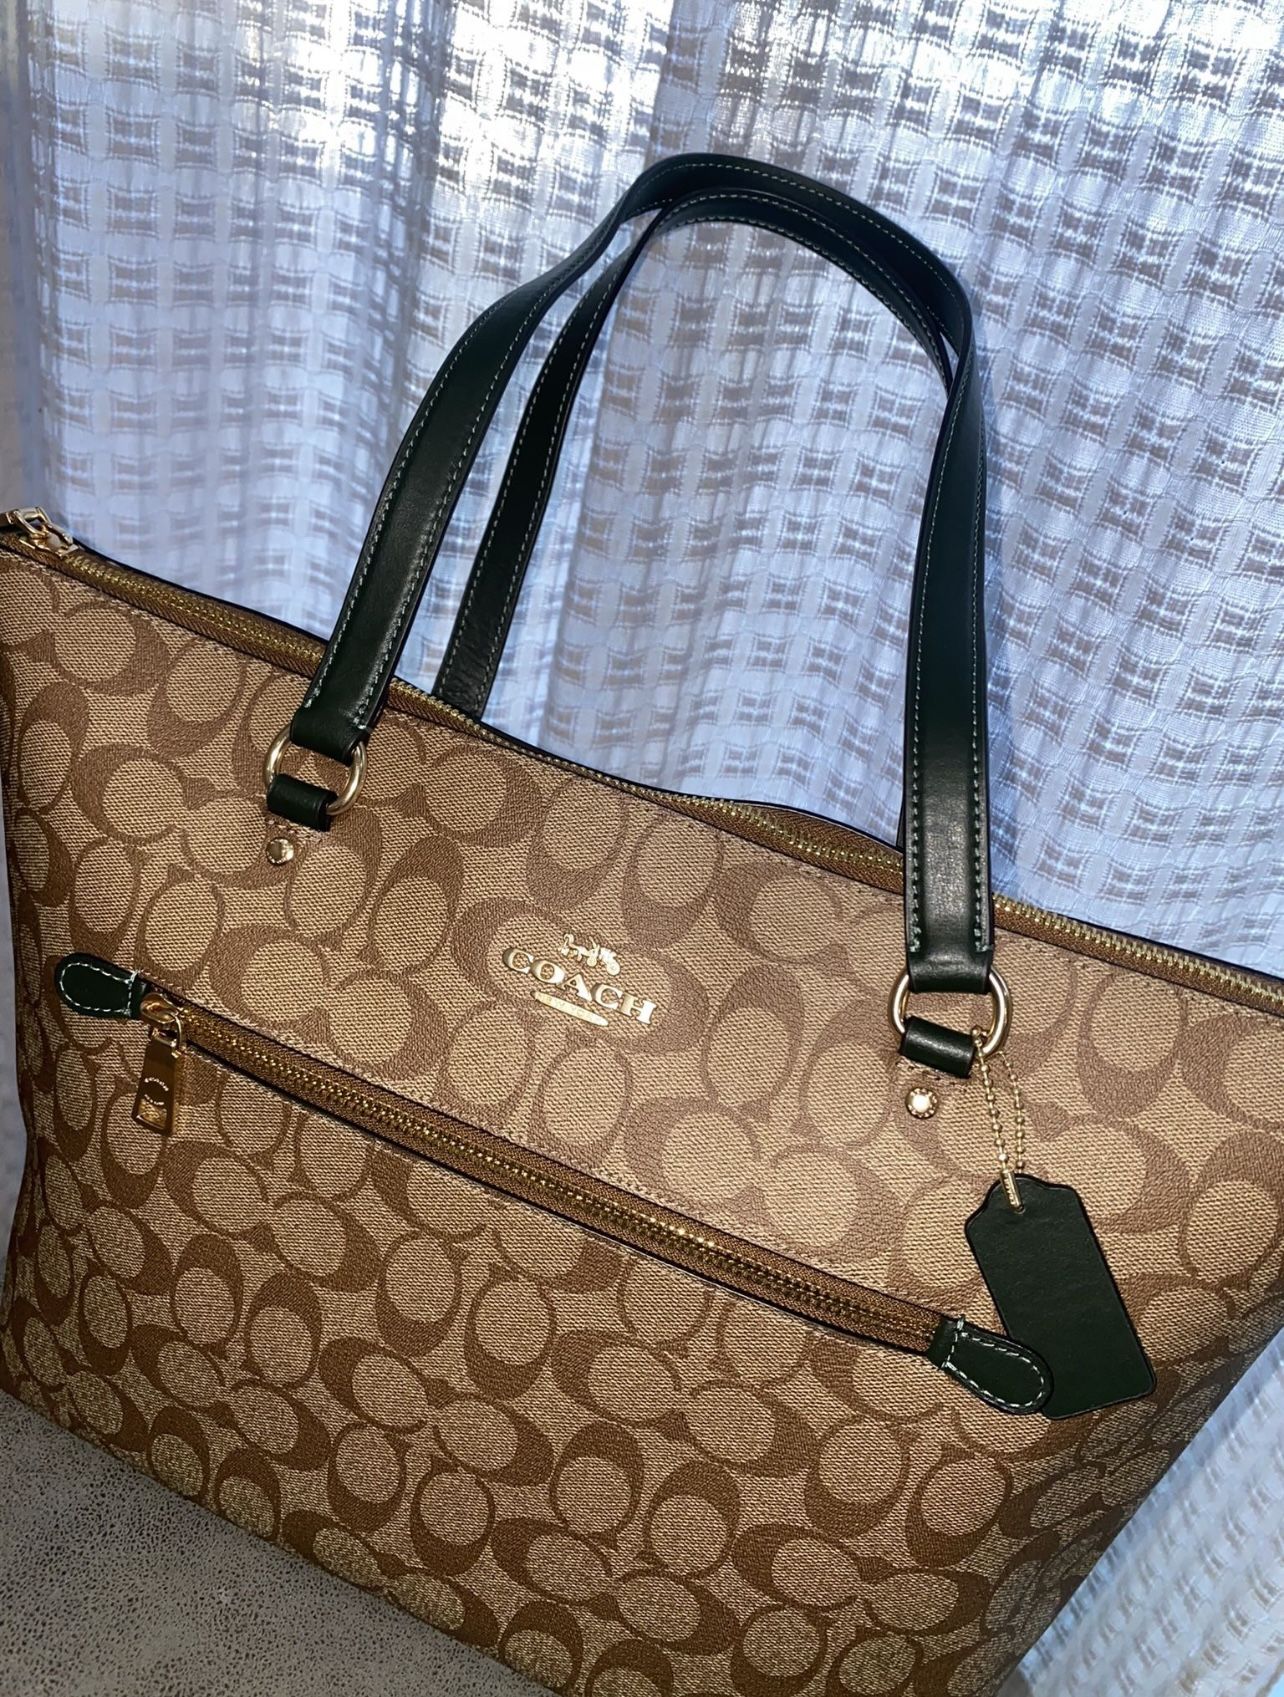 Louis Vuitton Backpack for Sale in Victorville, CA - OfferUp